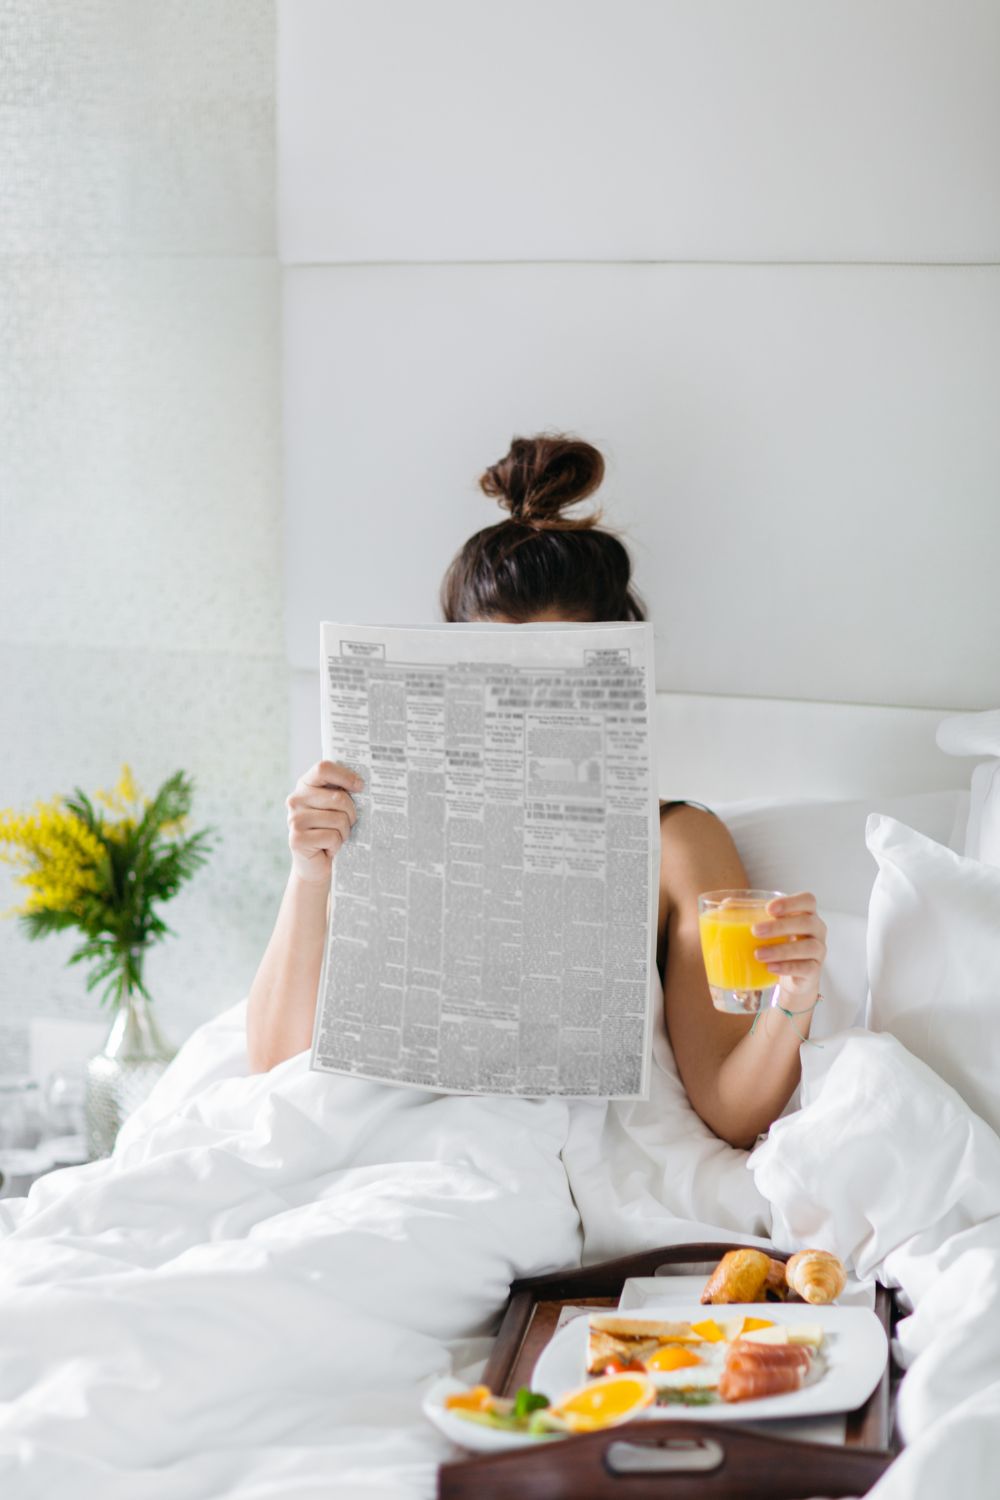 How To Cut Down On Your Morning Routine